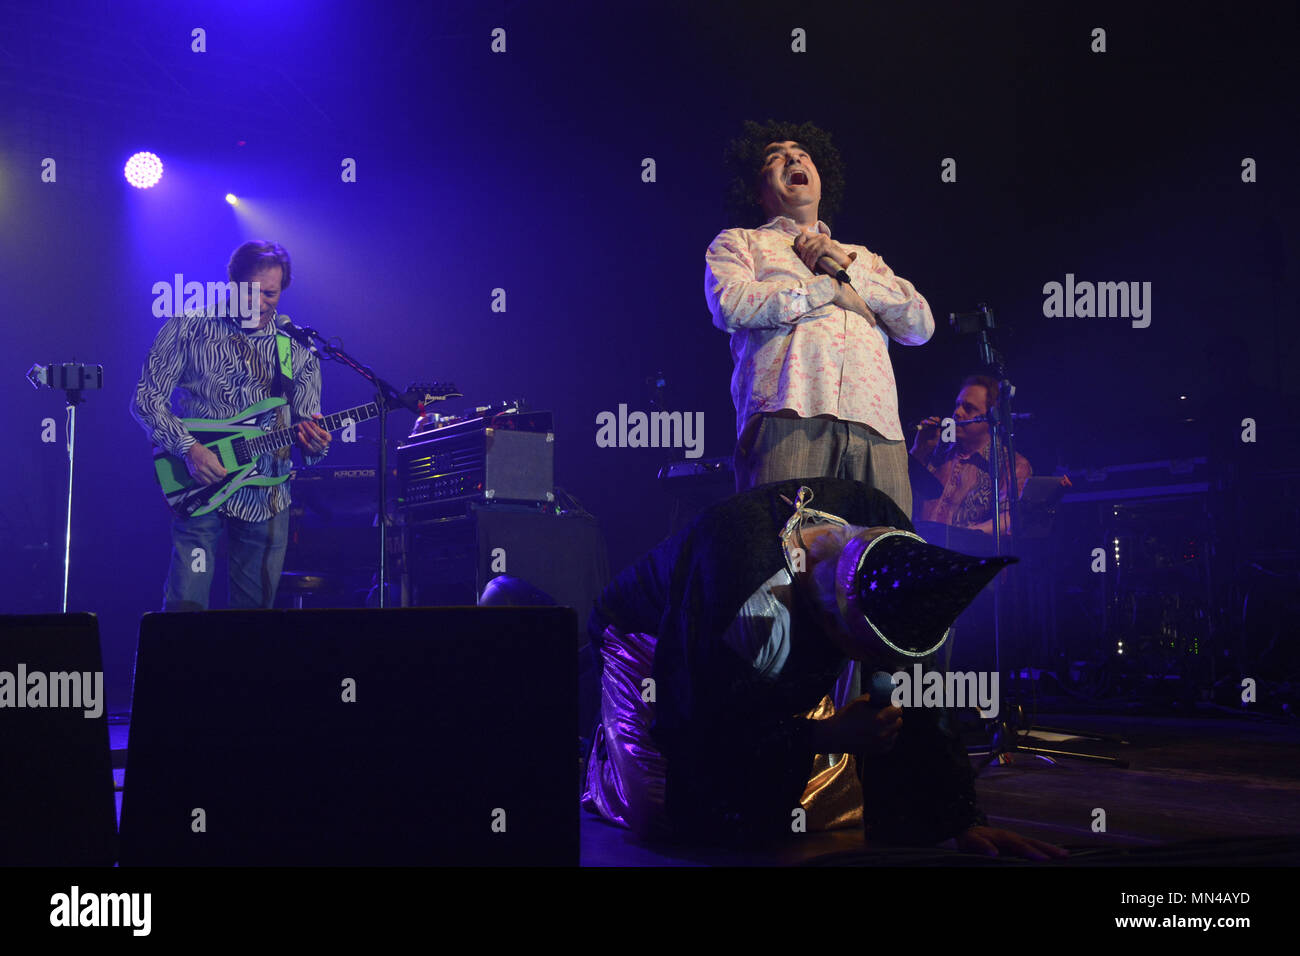 Naples, Italy. 14th May, 2018. The Italian comic rock band Elio e Le Storie Tese performing on stage at Casa della Musica in Naples, Italy for their last tour called “Tour d’Addio”. Credit: Mariano Montella/Alamy Live News Stock Photo